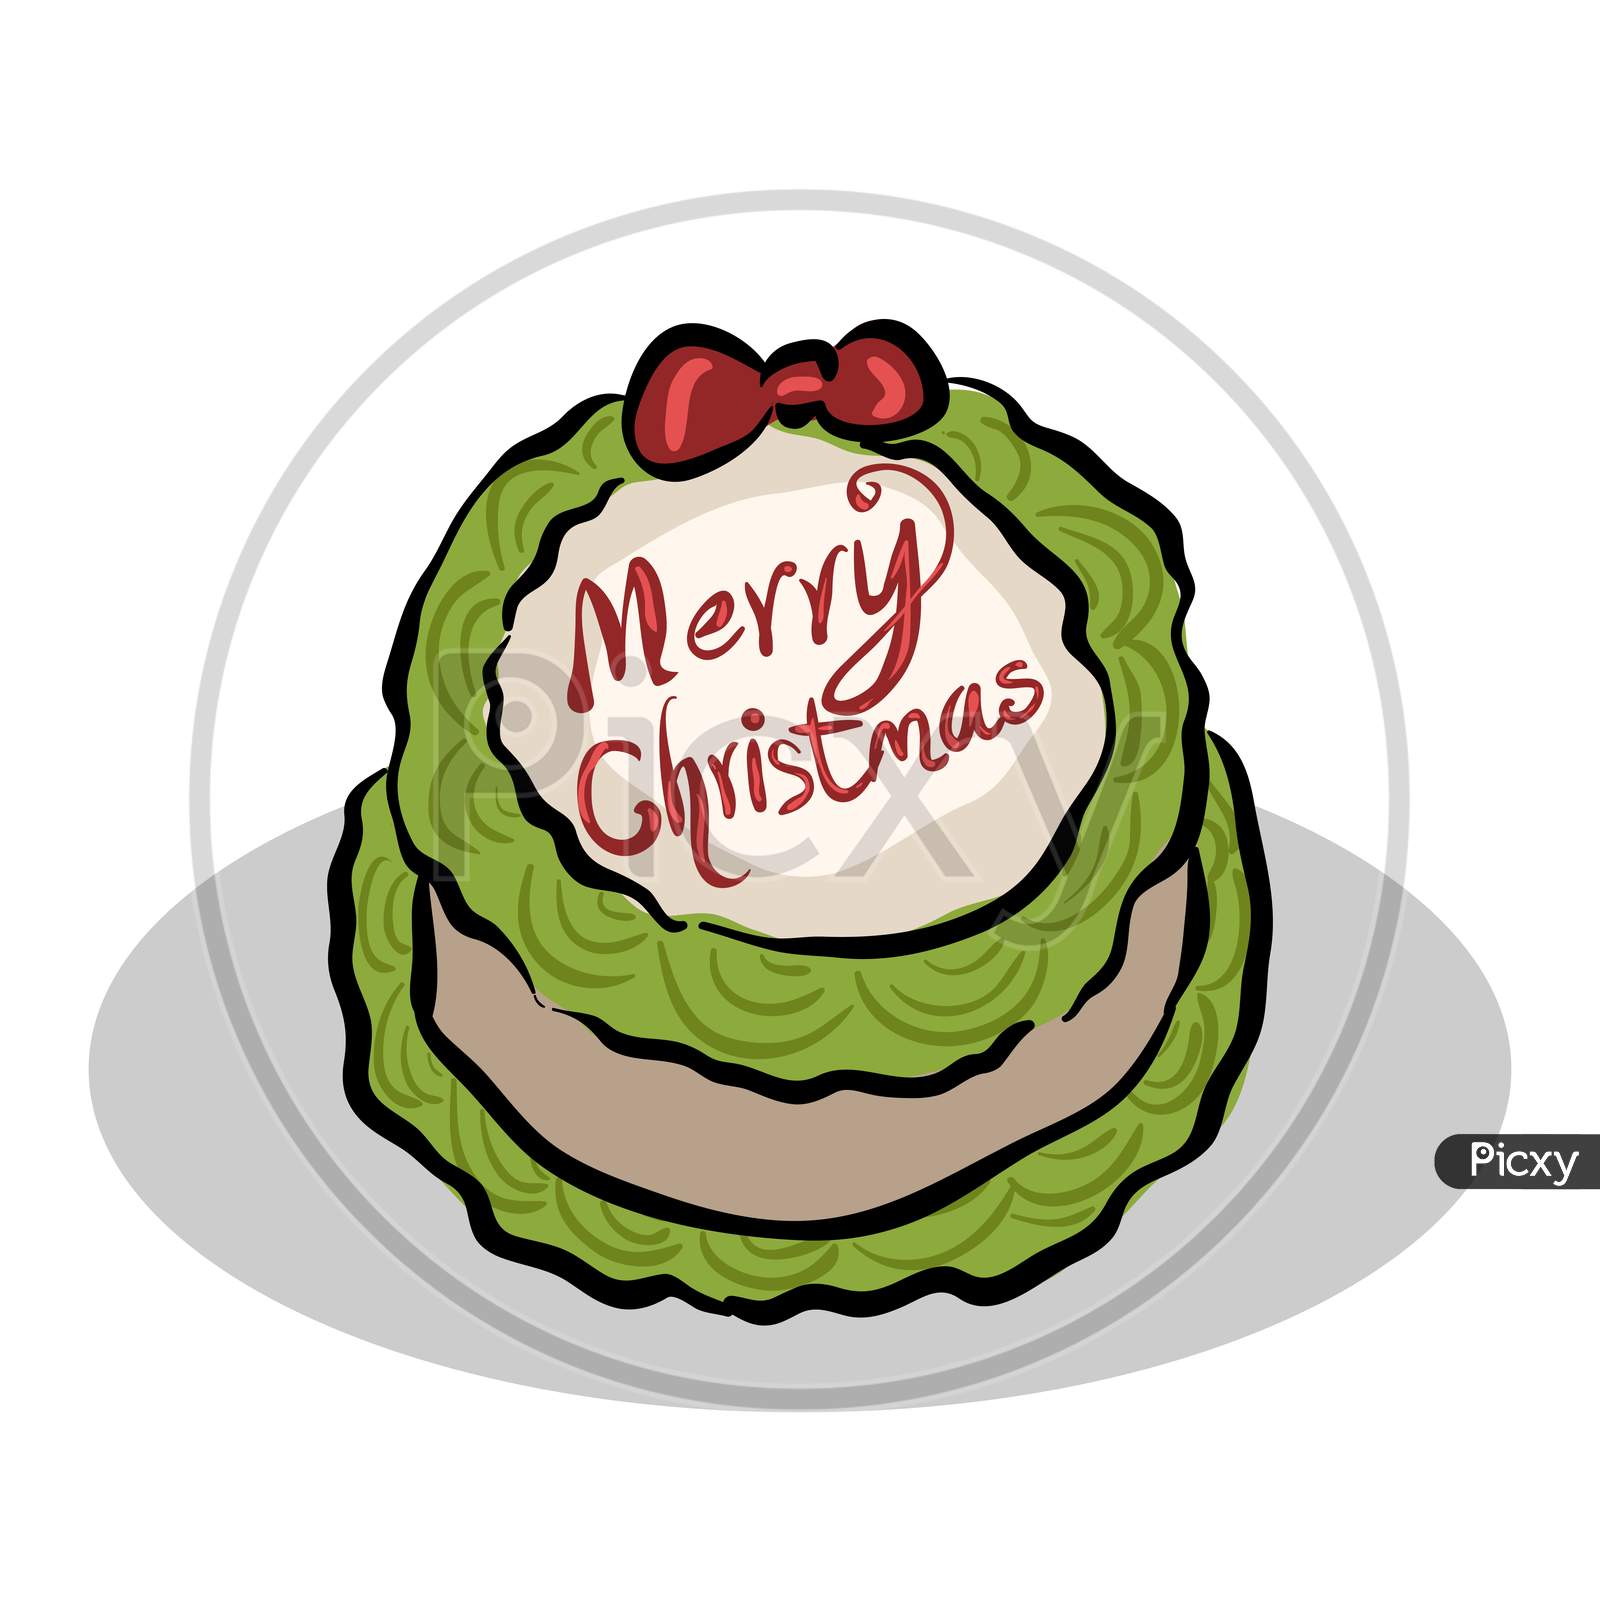 Christmas Cake Clipart, Christmas Dessert Clipart,cake Logo  Design,watercolor Holiday Food,digital Sweets Clipart,cake Stand  Clipart,png - Etsy Canada | Christmas cake, Cake logo design, Christmas  desserts